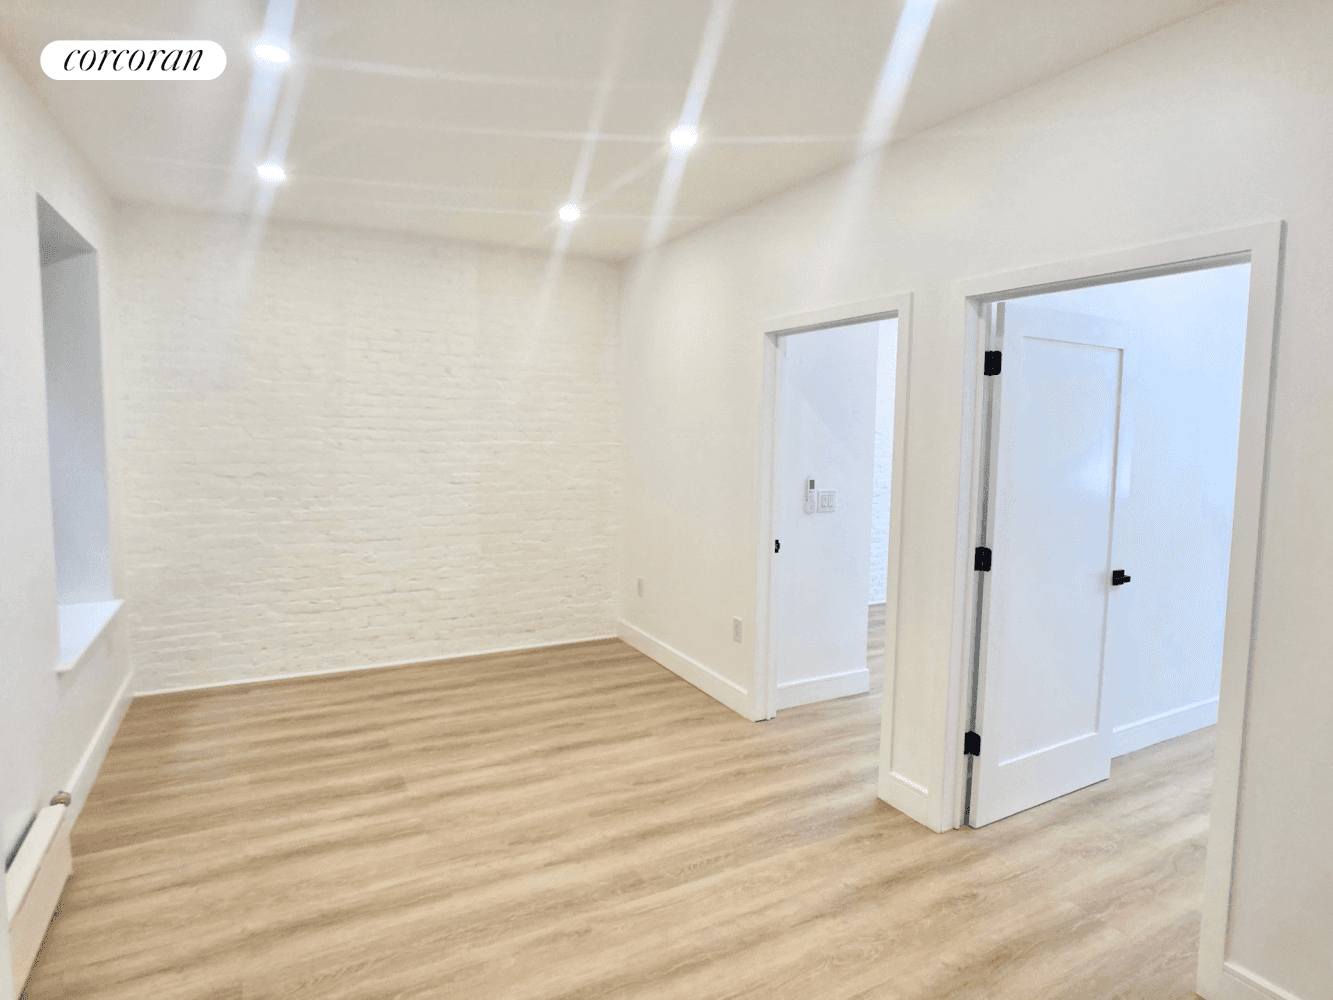 Hello beautiful, welcome to this newly gut renovated 2 bedroom with a spacious living room, in unit washer dryer and well proportioned equal size bedrooms.